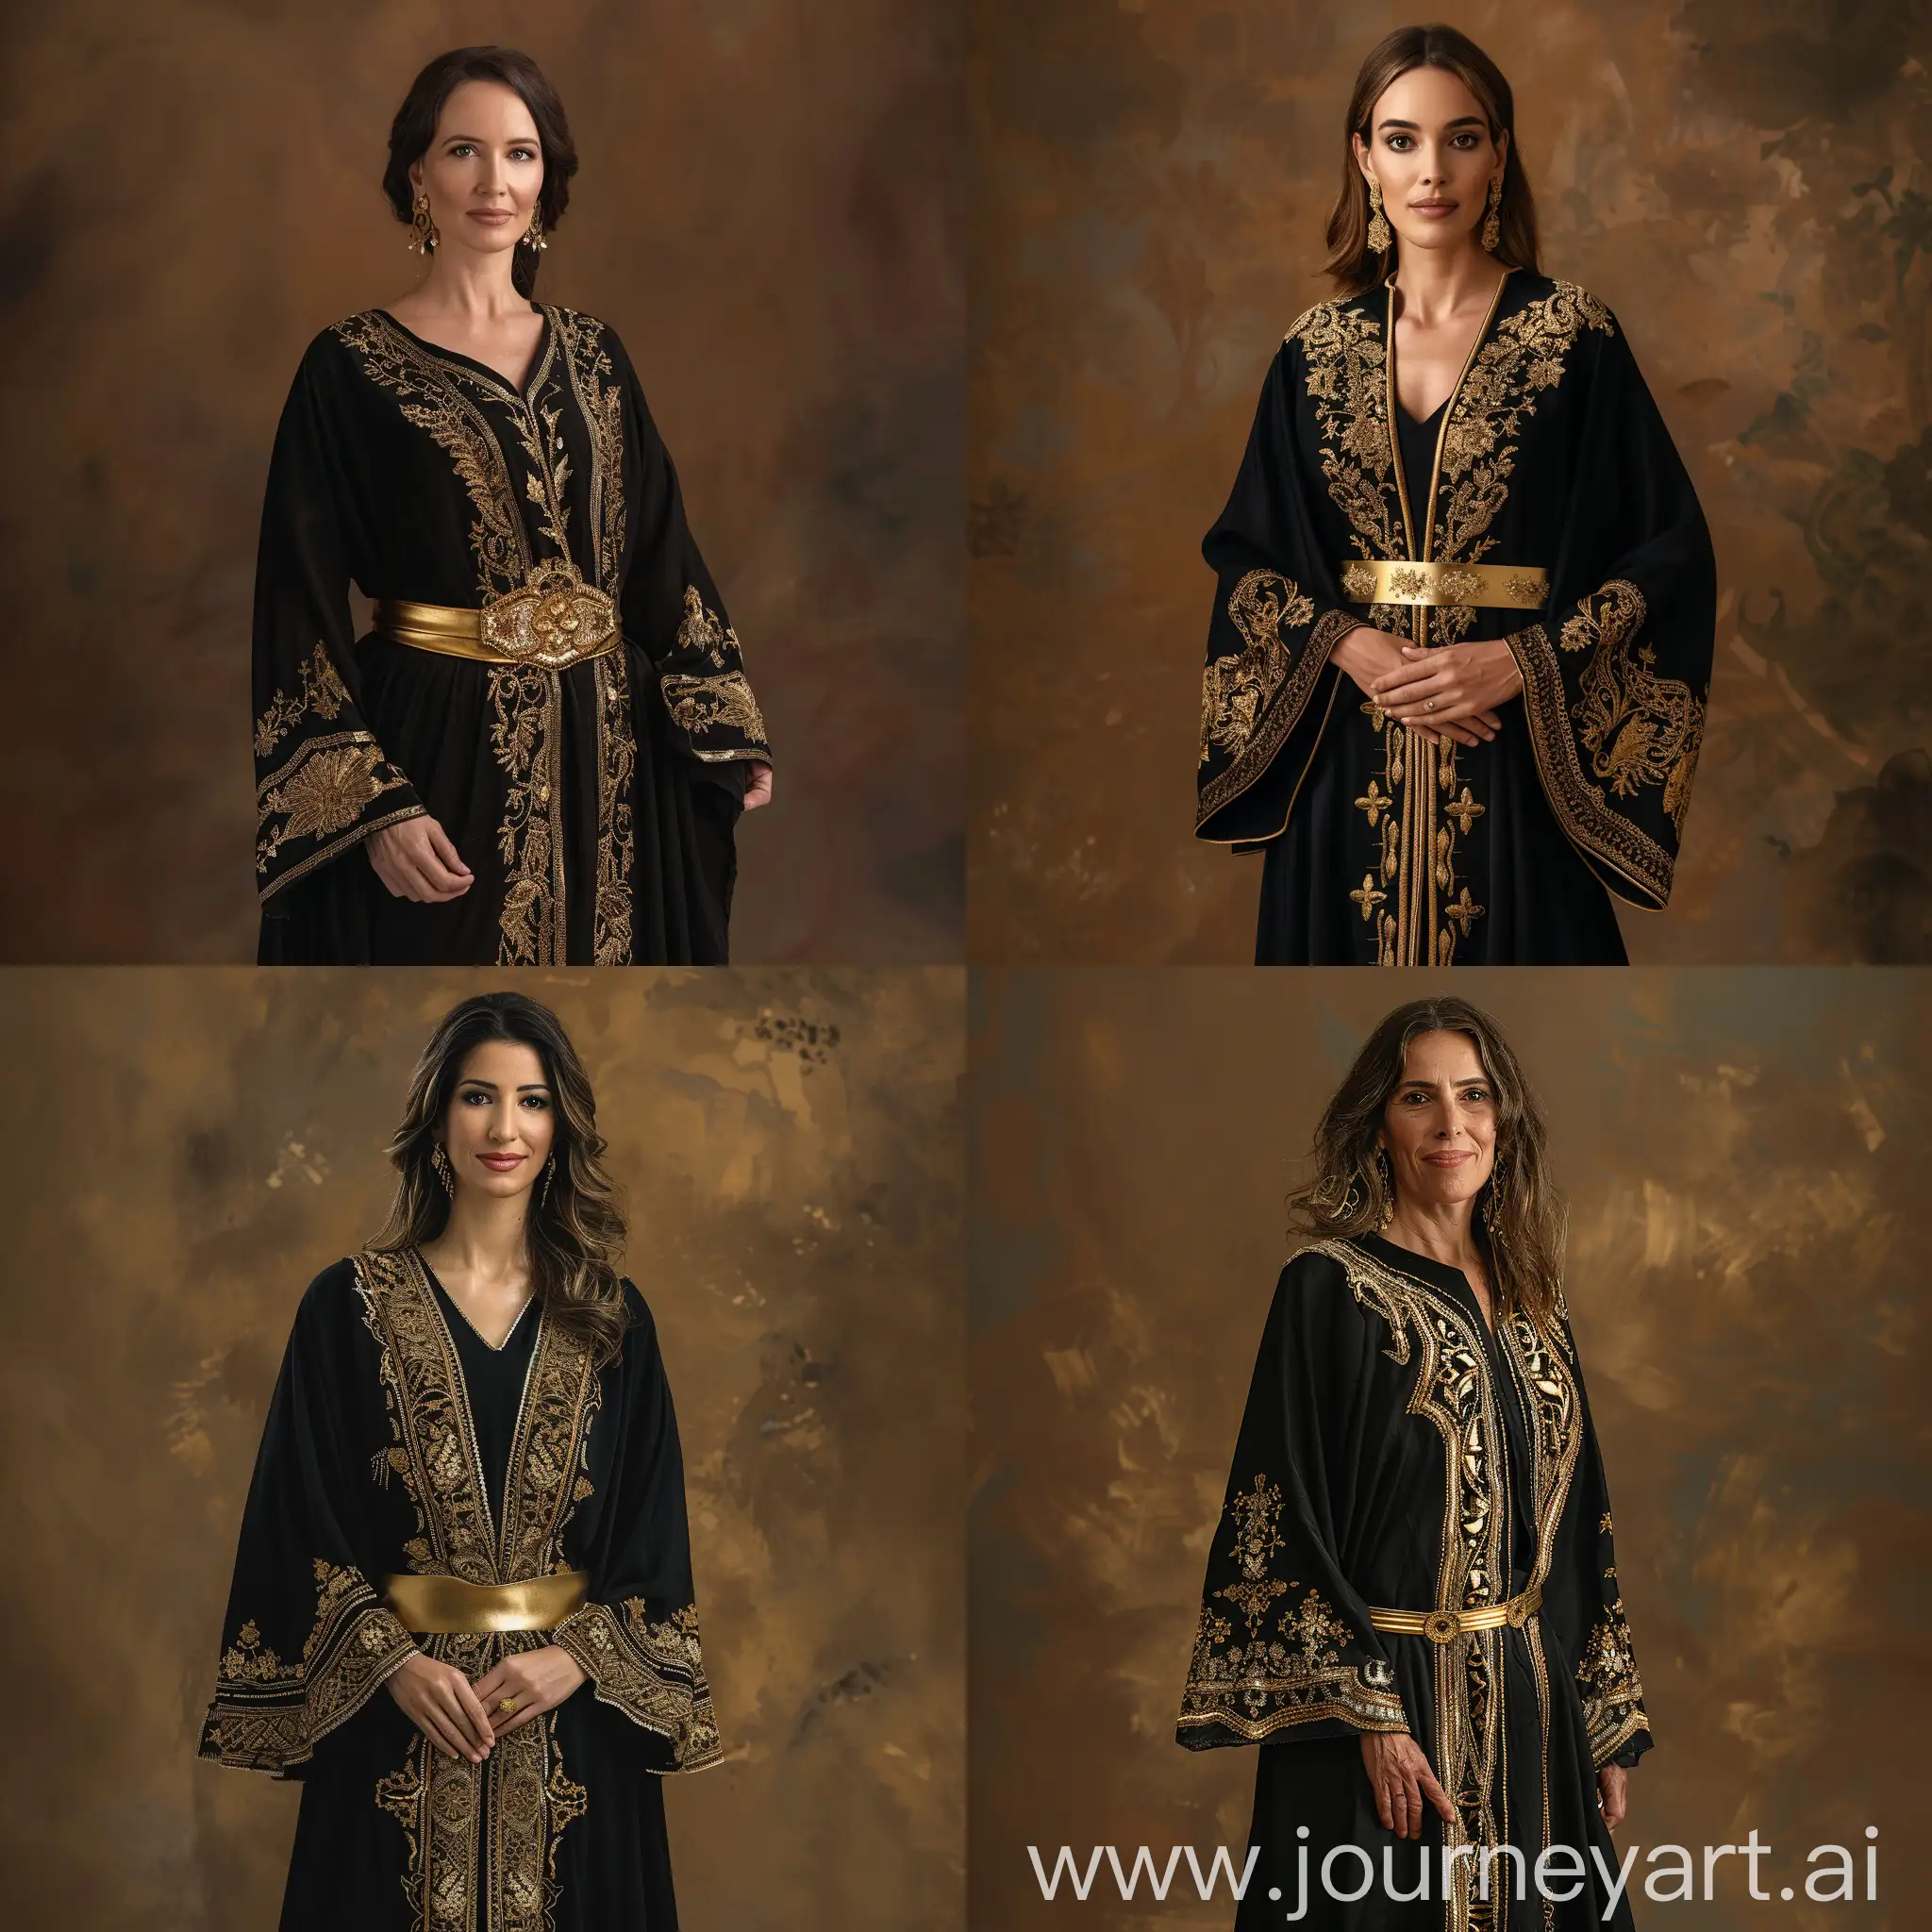 make image,  a 30 years old woman dressed in an elegant black Moroccan Caftan with detailed gold embroidery, Gold waist belt, brown background, studio lighting